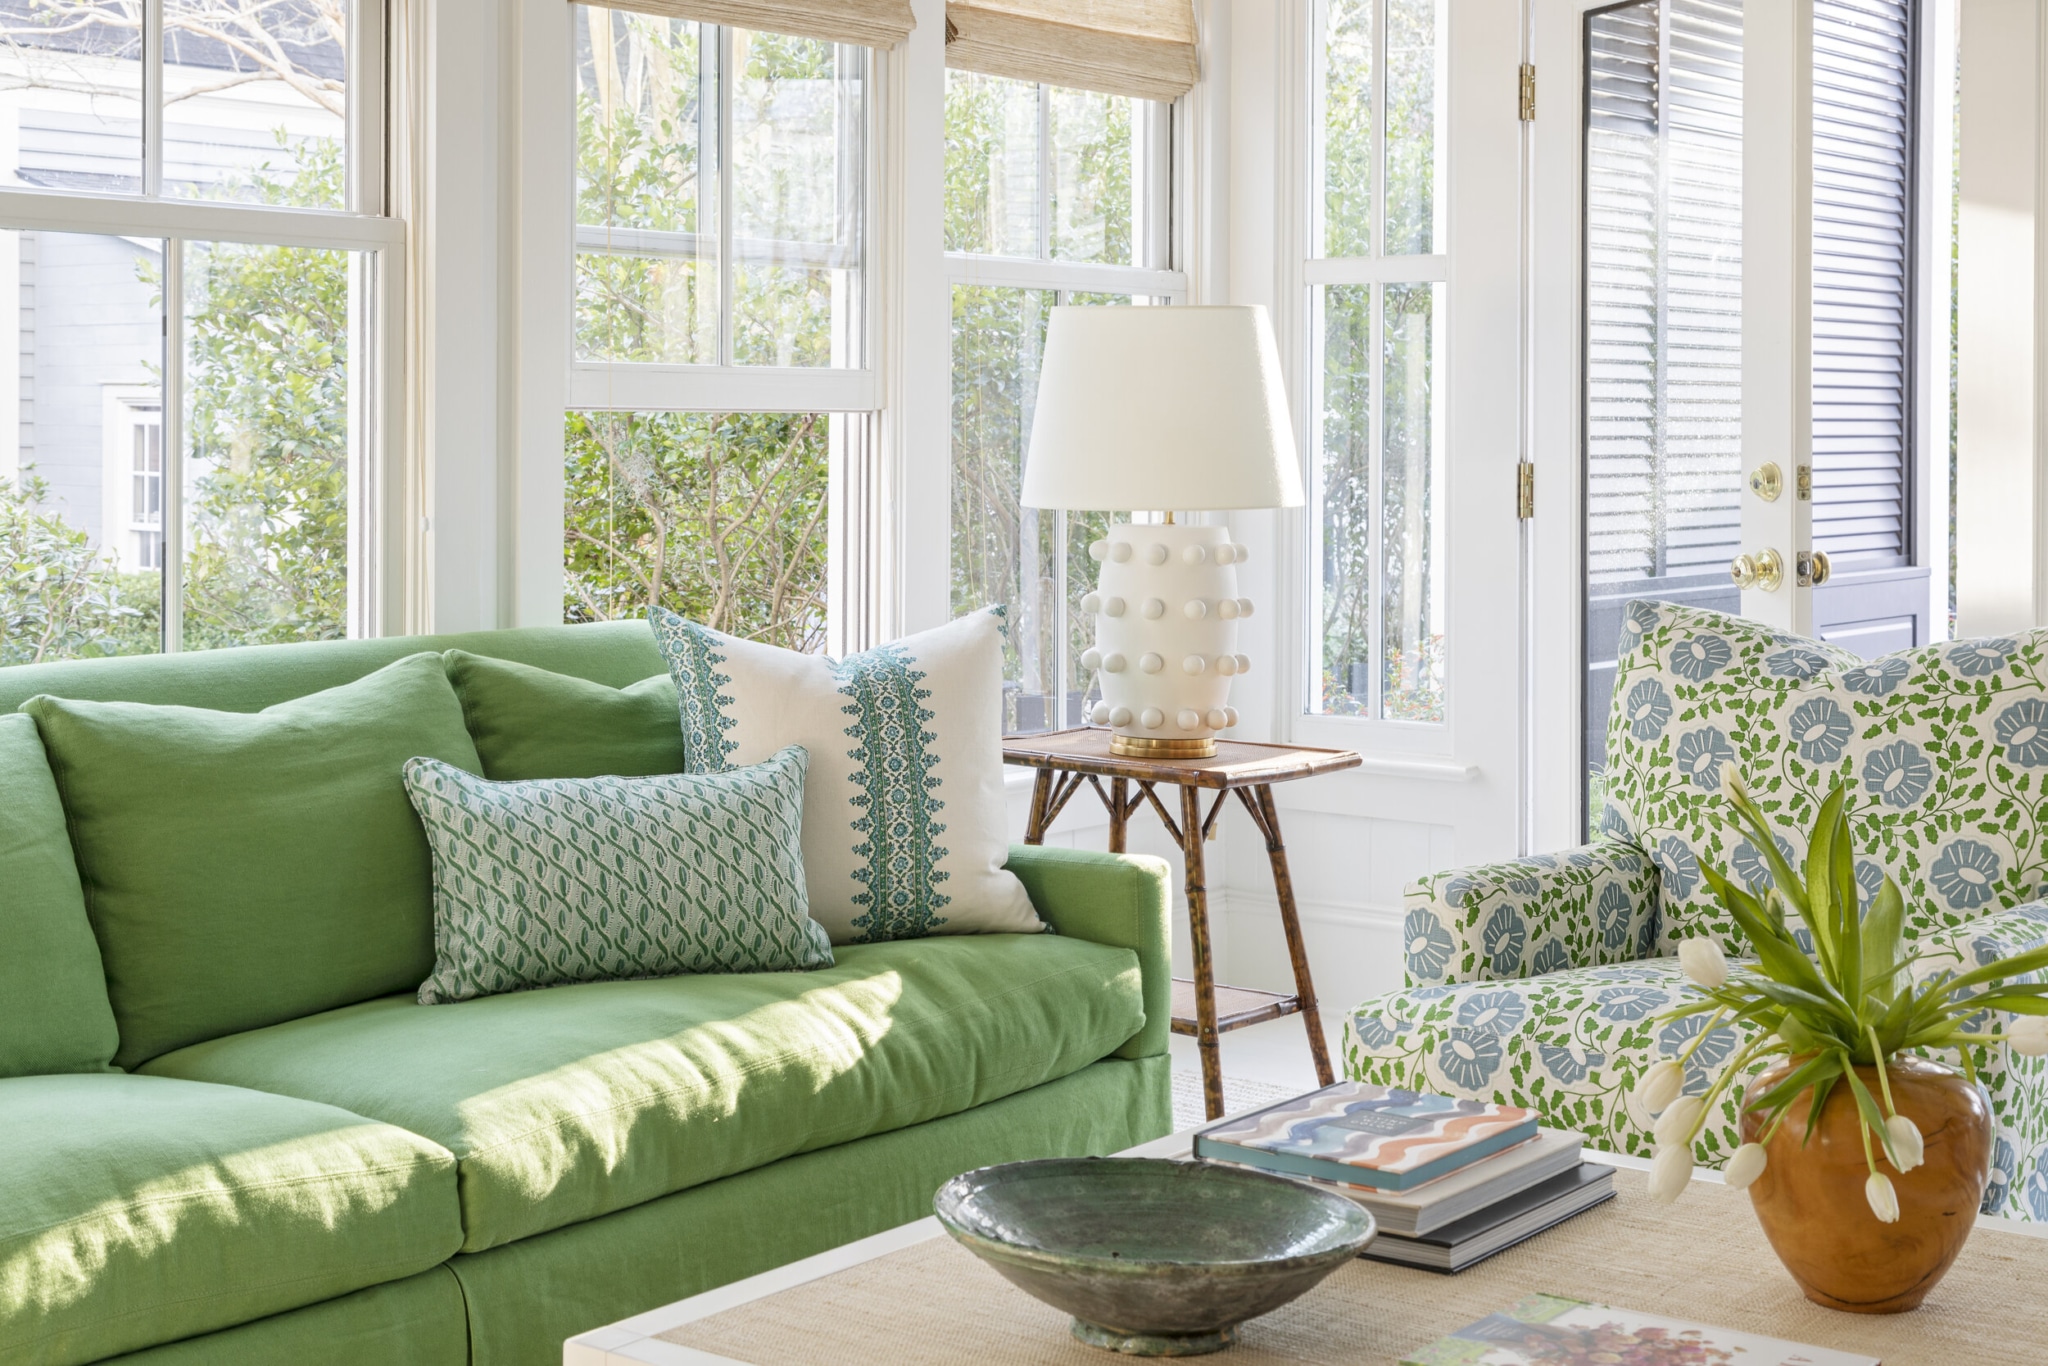 Allison Elebash Design | Julia Lynn Photography Mount Pleasant home -sunroom with hanging chandelier - love the seagrass coffee table and fiddle leaf fig tree - window seat - 